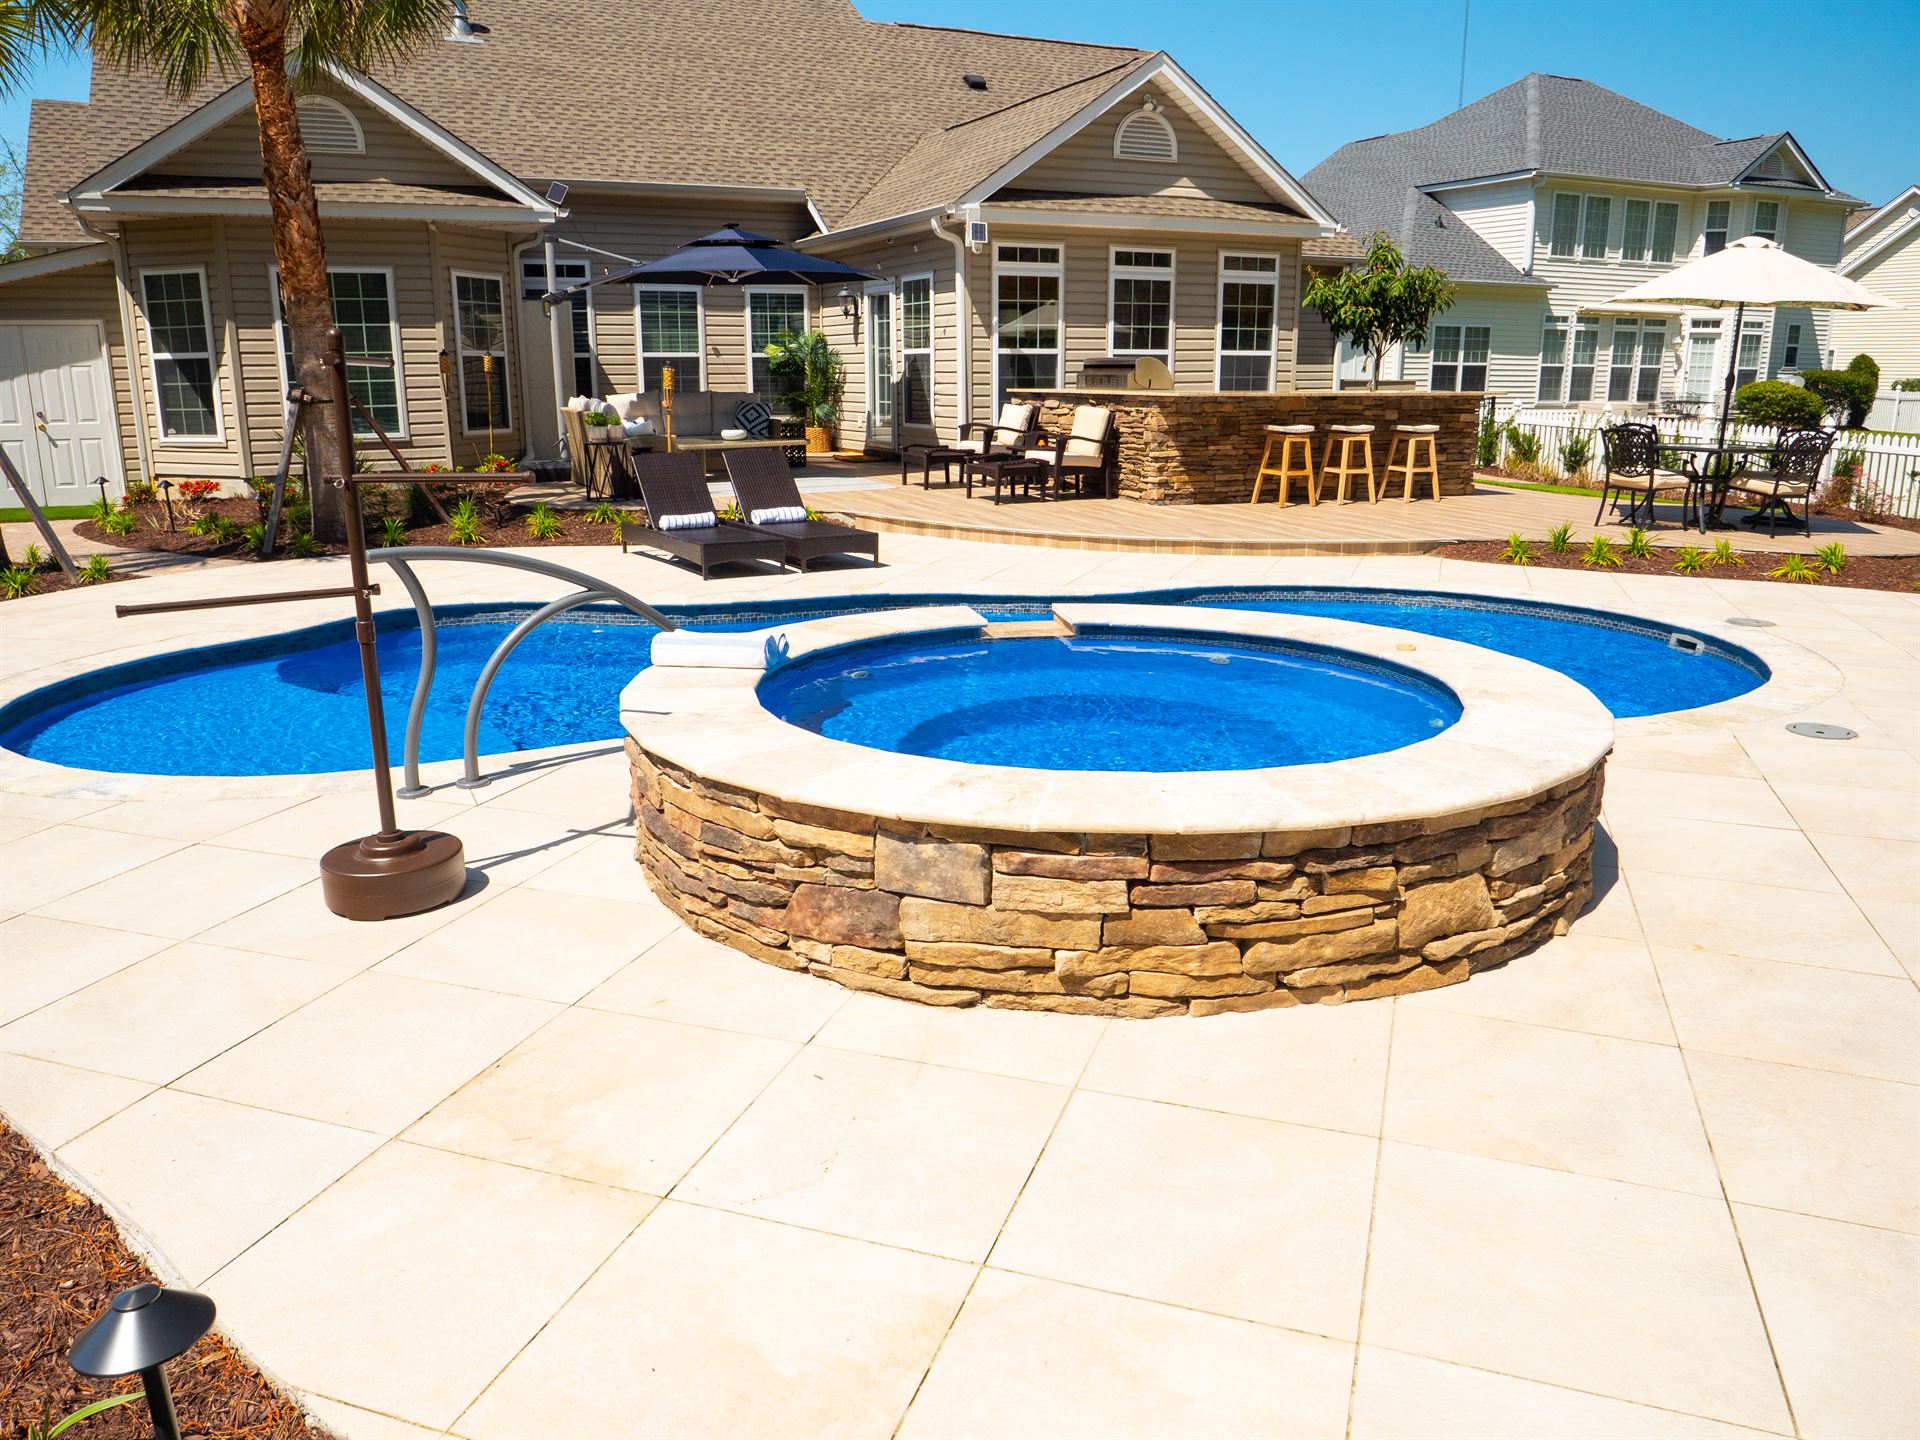 River Pools I30 + RS08 with spillway in Maya Shimmer with natural stone patio and coping